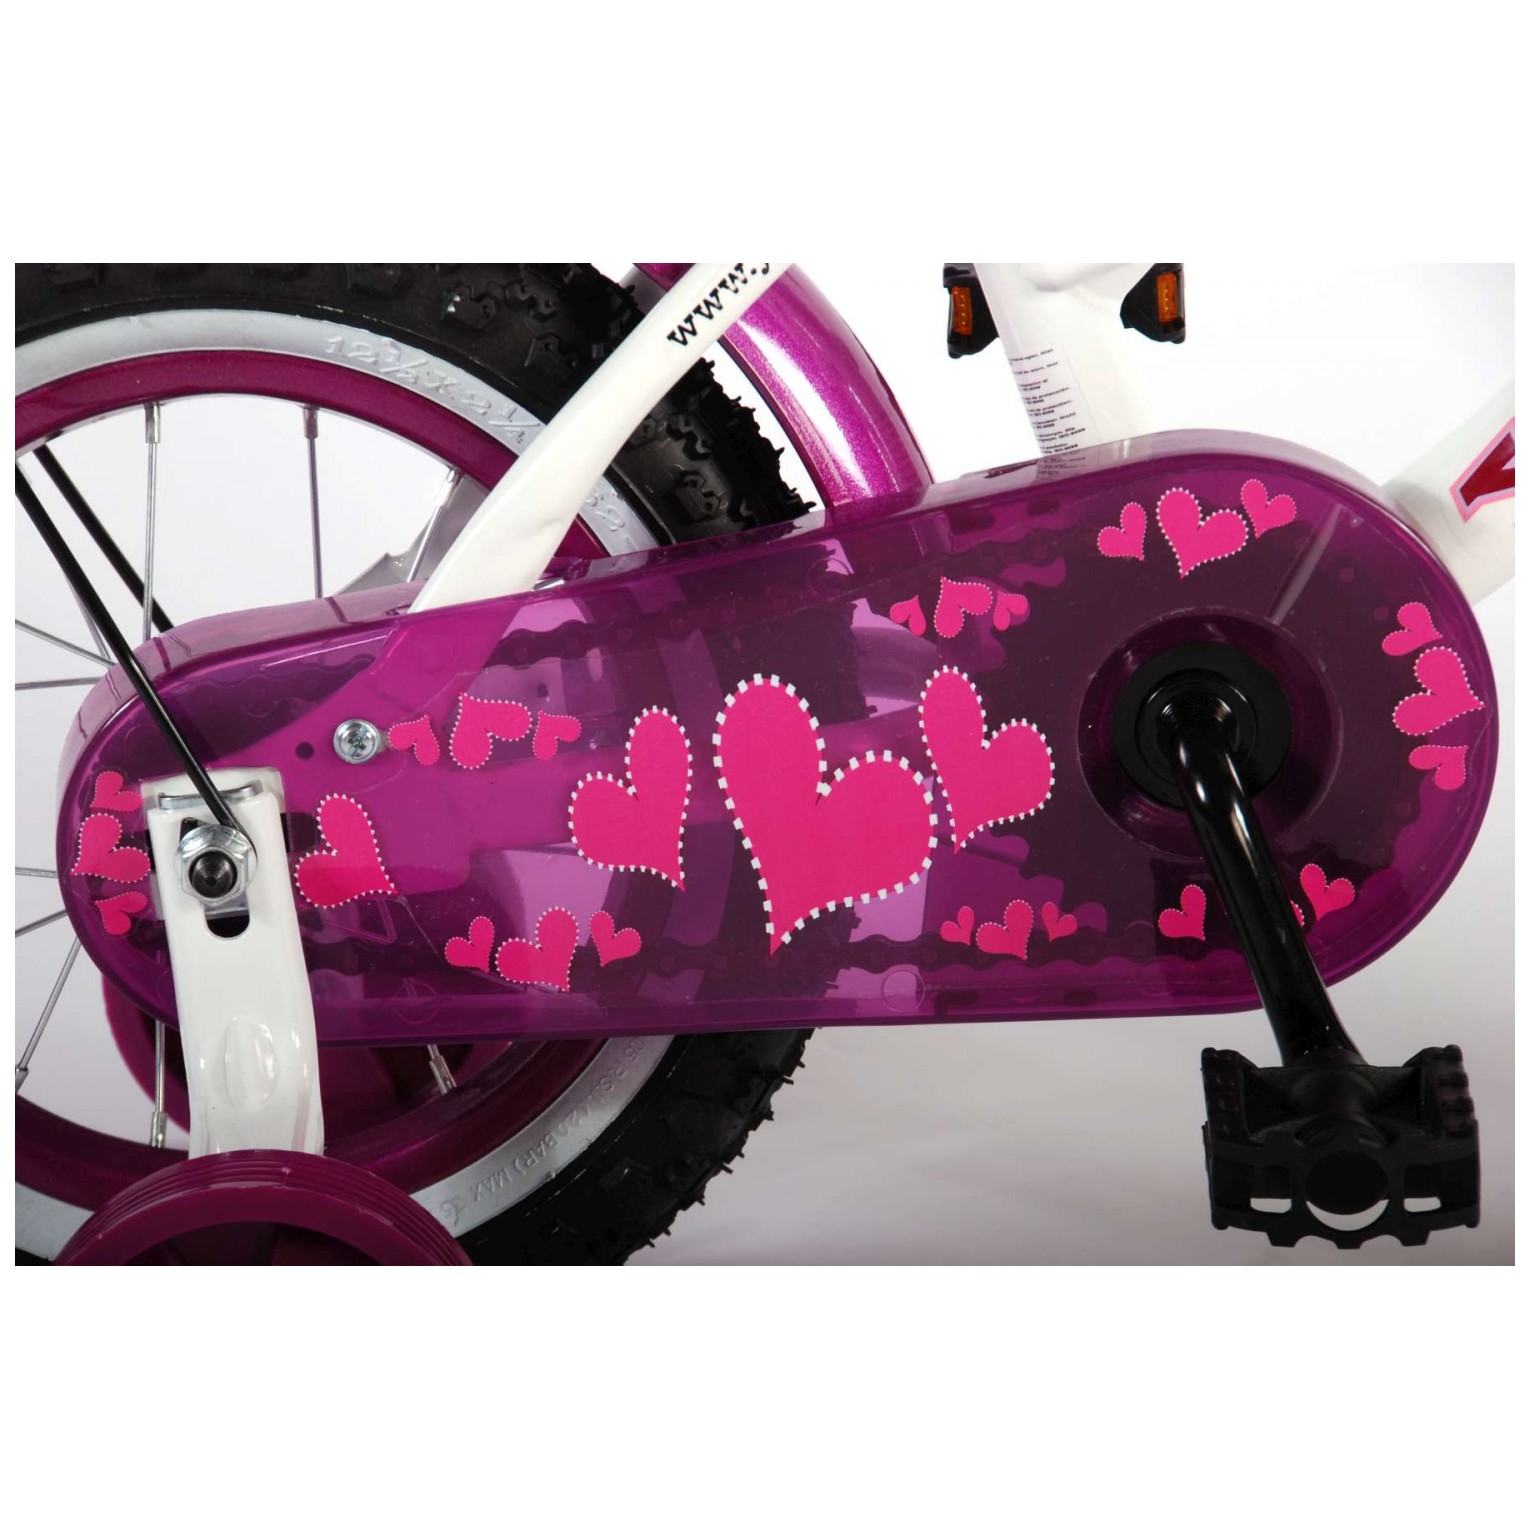 Volare Heart Cruiser Fiets - 12 inch - Wit Paars